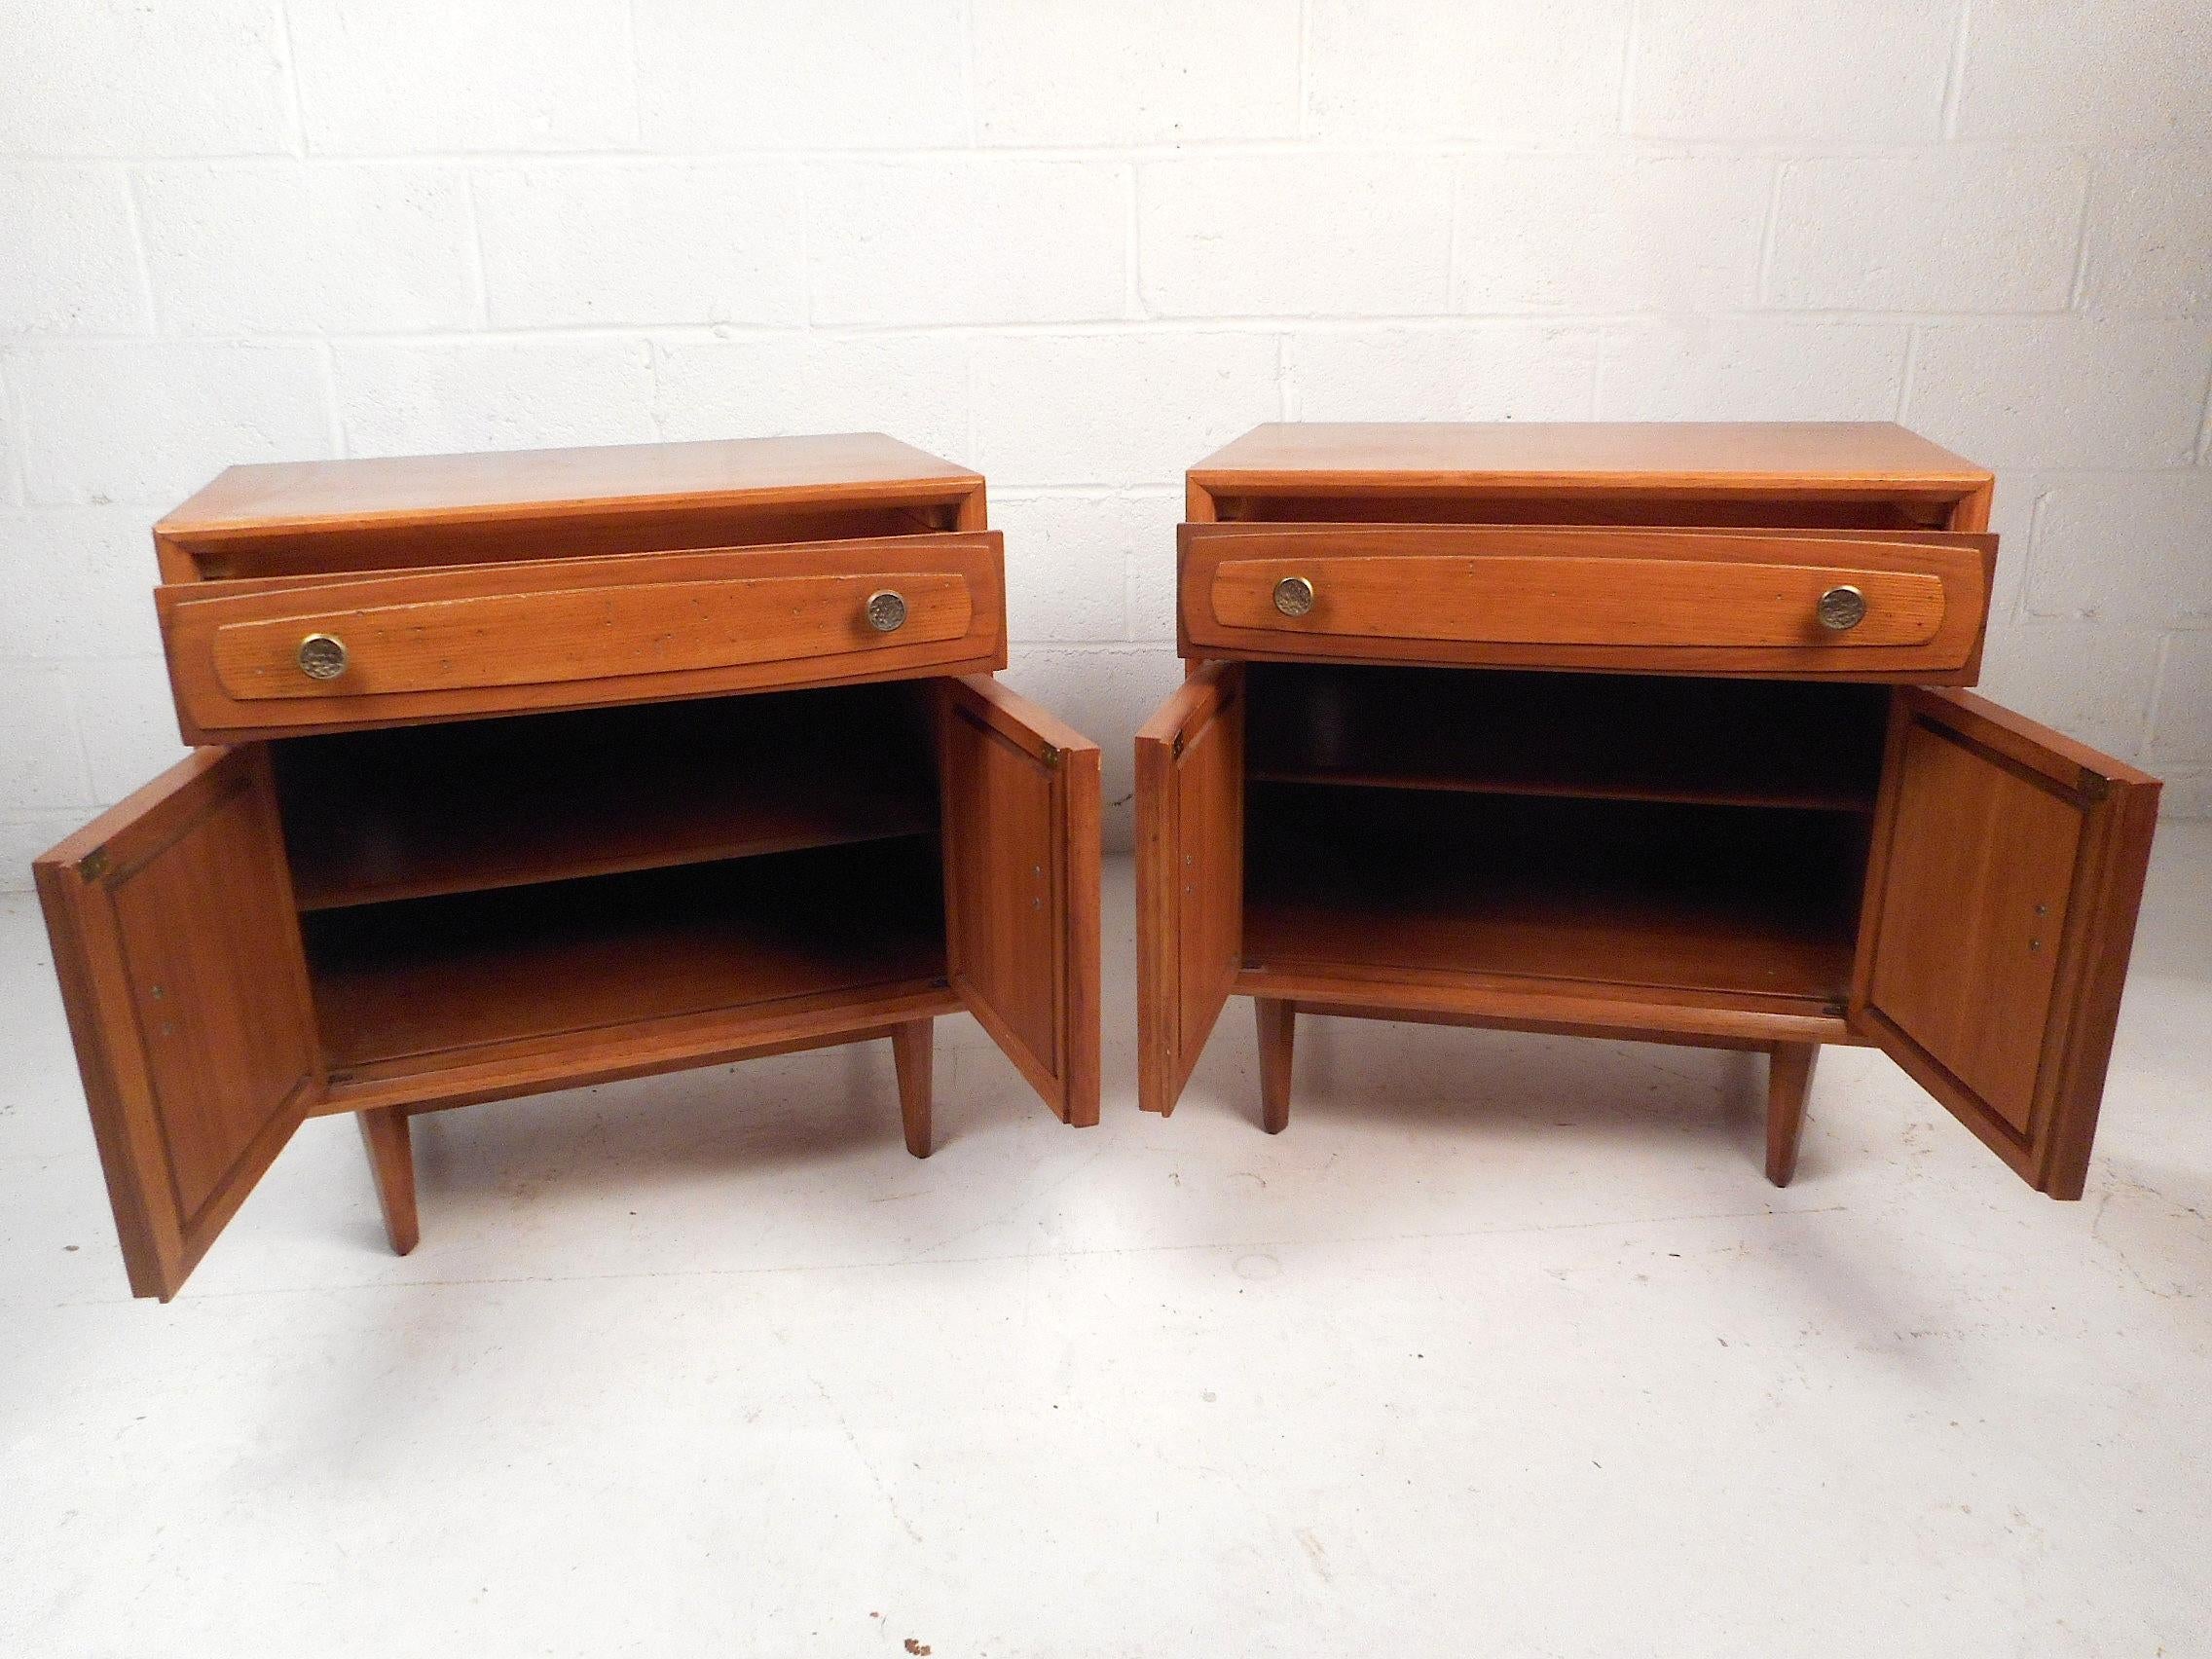 This stylish pair of midcentury nightstands feature a sturdy walnut construction with an elegant vintage finish, adjustable interior shelves offering plentiful and dynamic storage space, interestingly textured drawer pulls, and dovetail-jointed